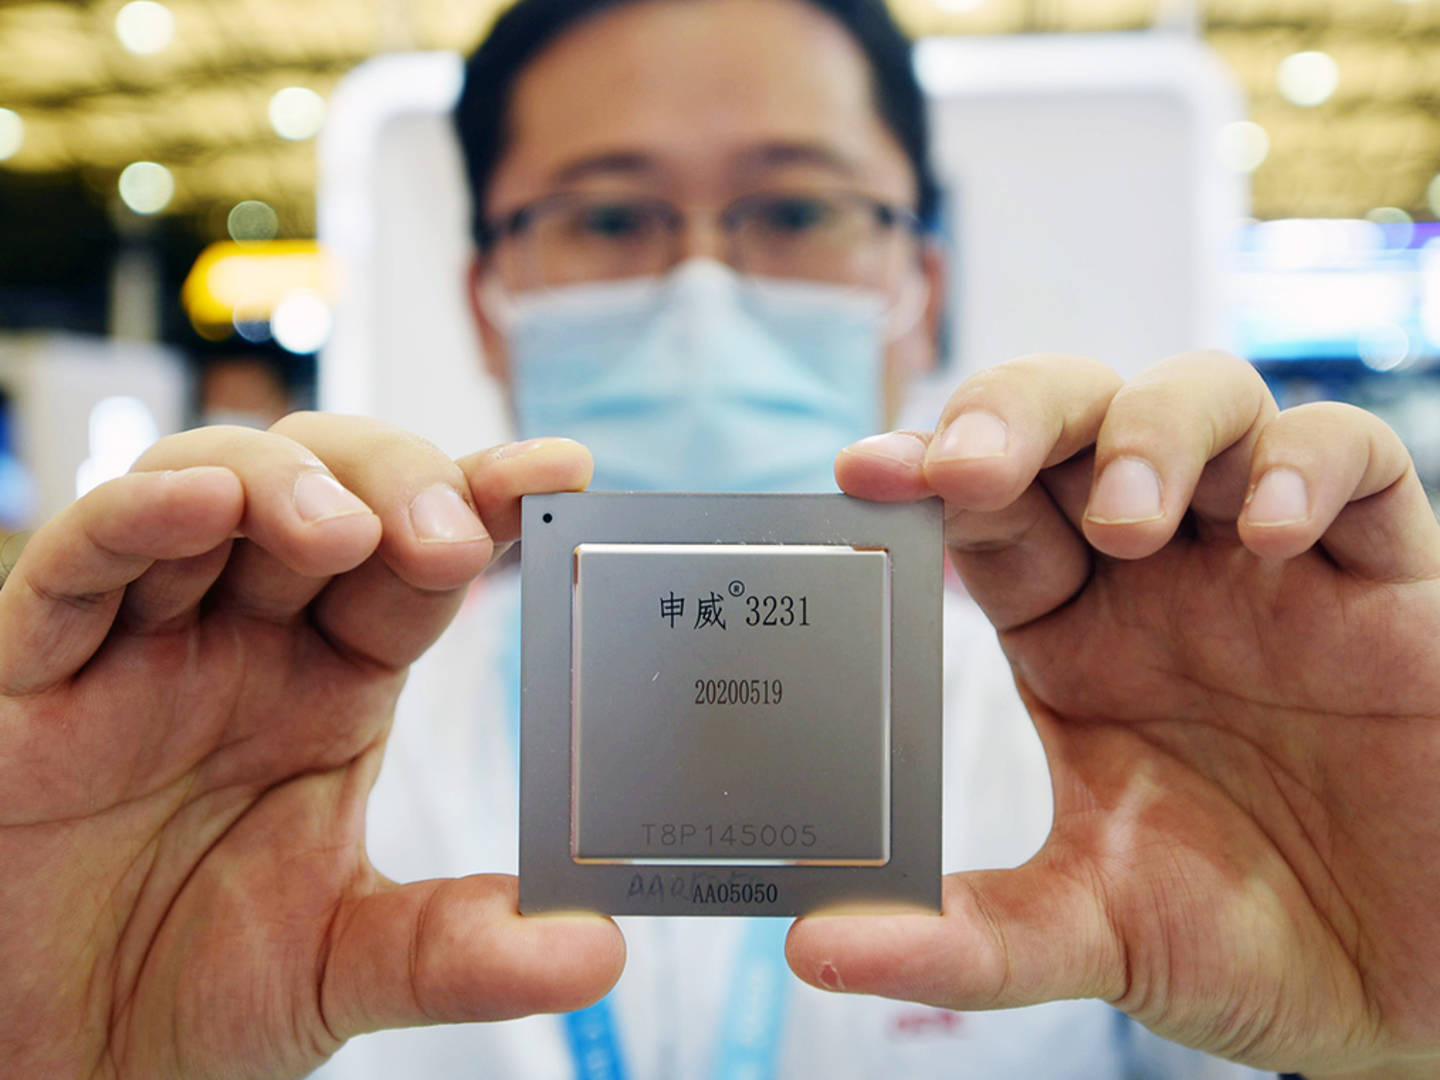 China’s stumbling sprint to semiconductor self-sufficiency